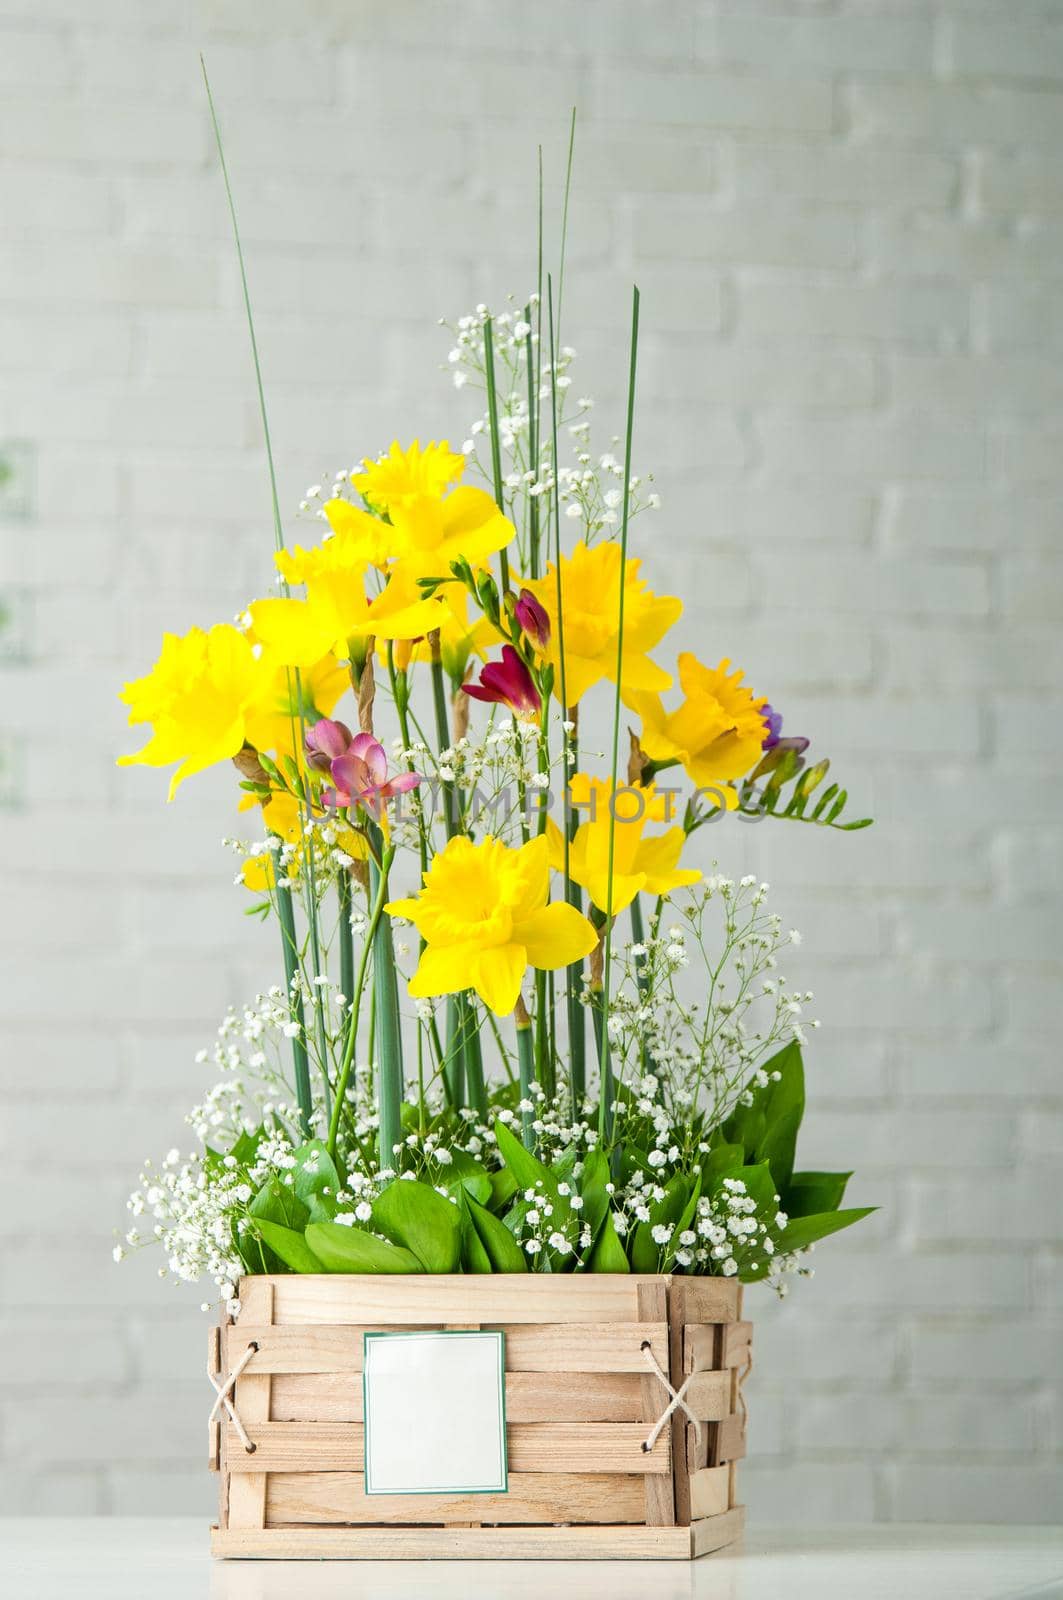 A vertical shot of a beautiful composition with daffodils and pink freesia in a wooden box